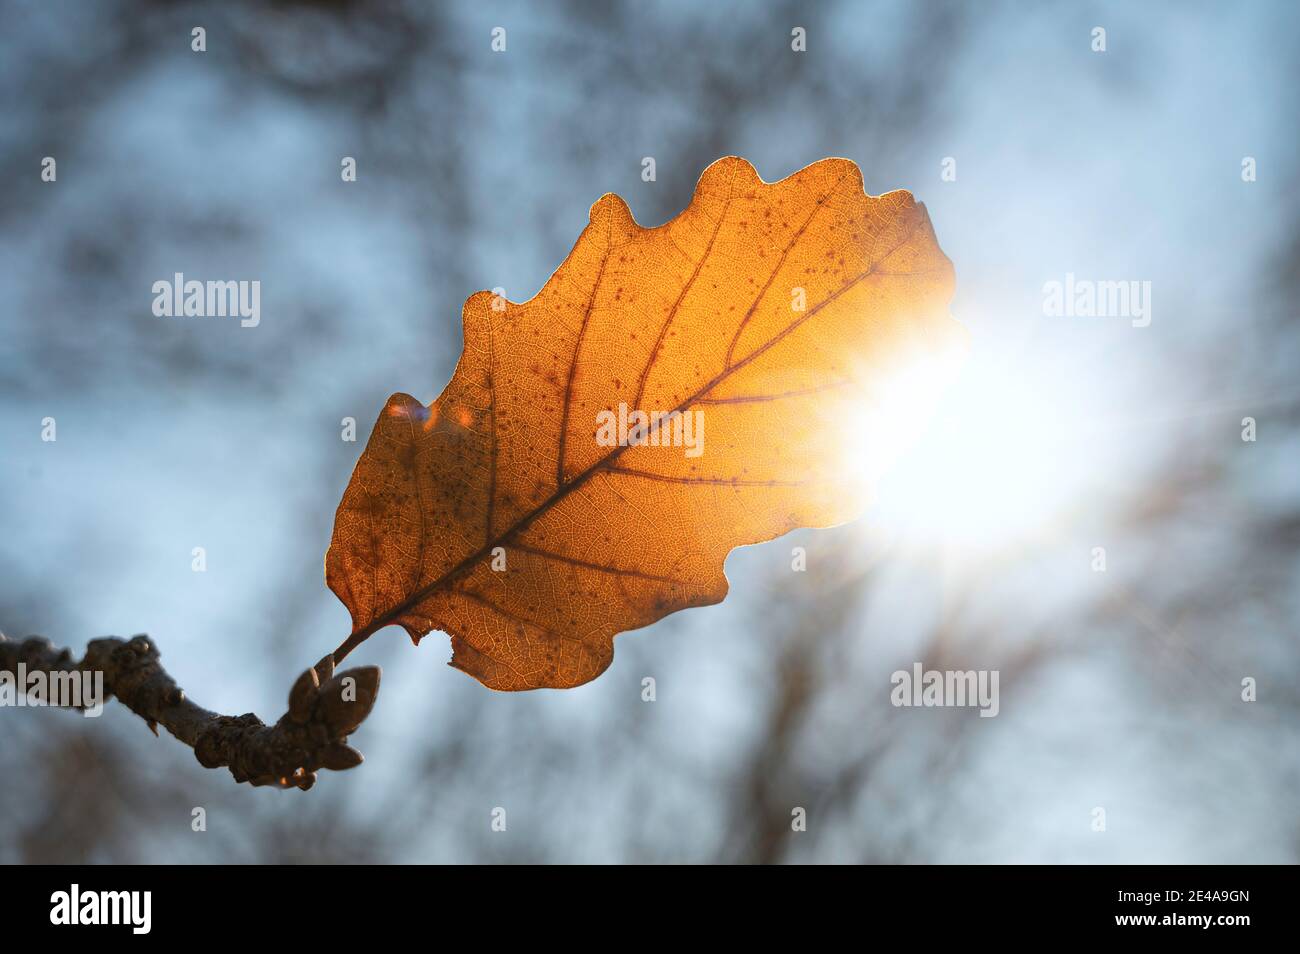 A solitary dried oak leaf on a tree with the winter sun in the background. Close-up shot of a tree leaf. Stock Photo